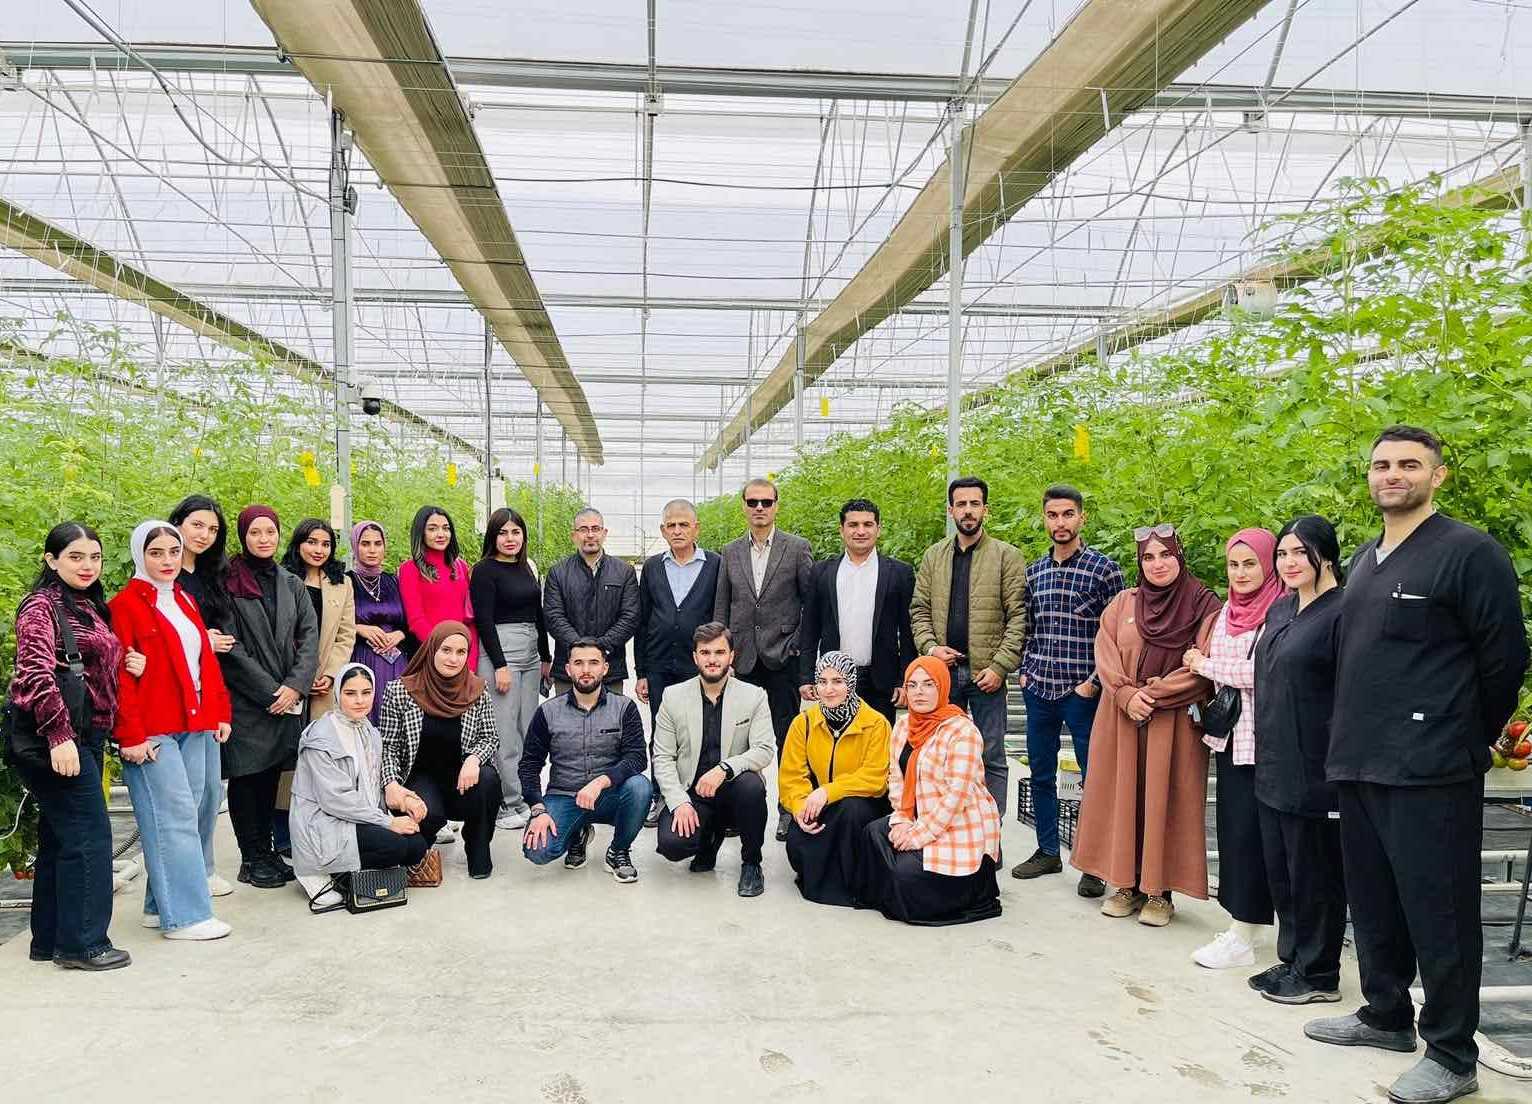 Department of Horticulture conducted a scientific trip to Erbil